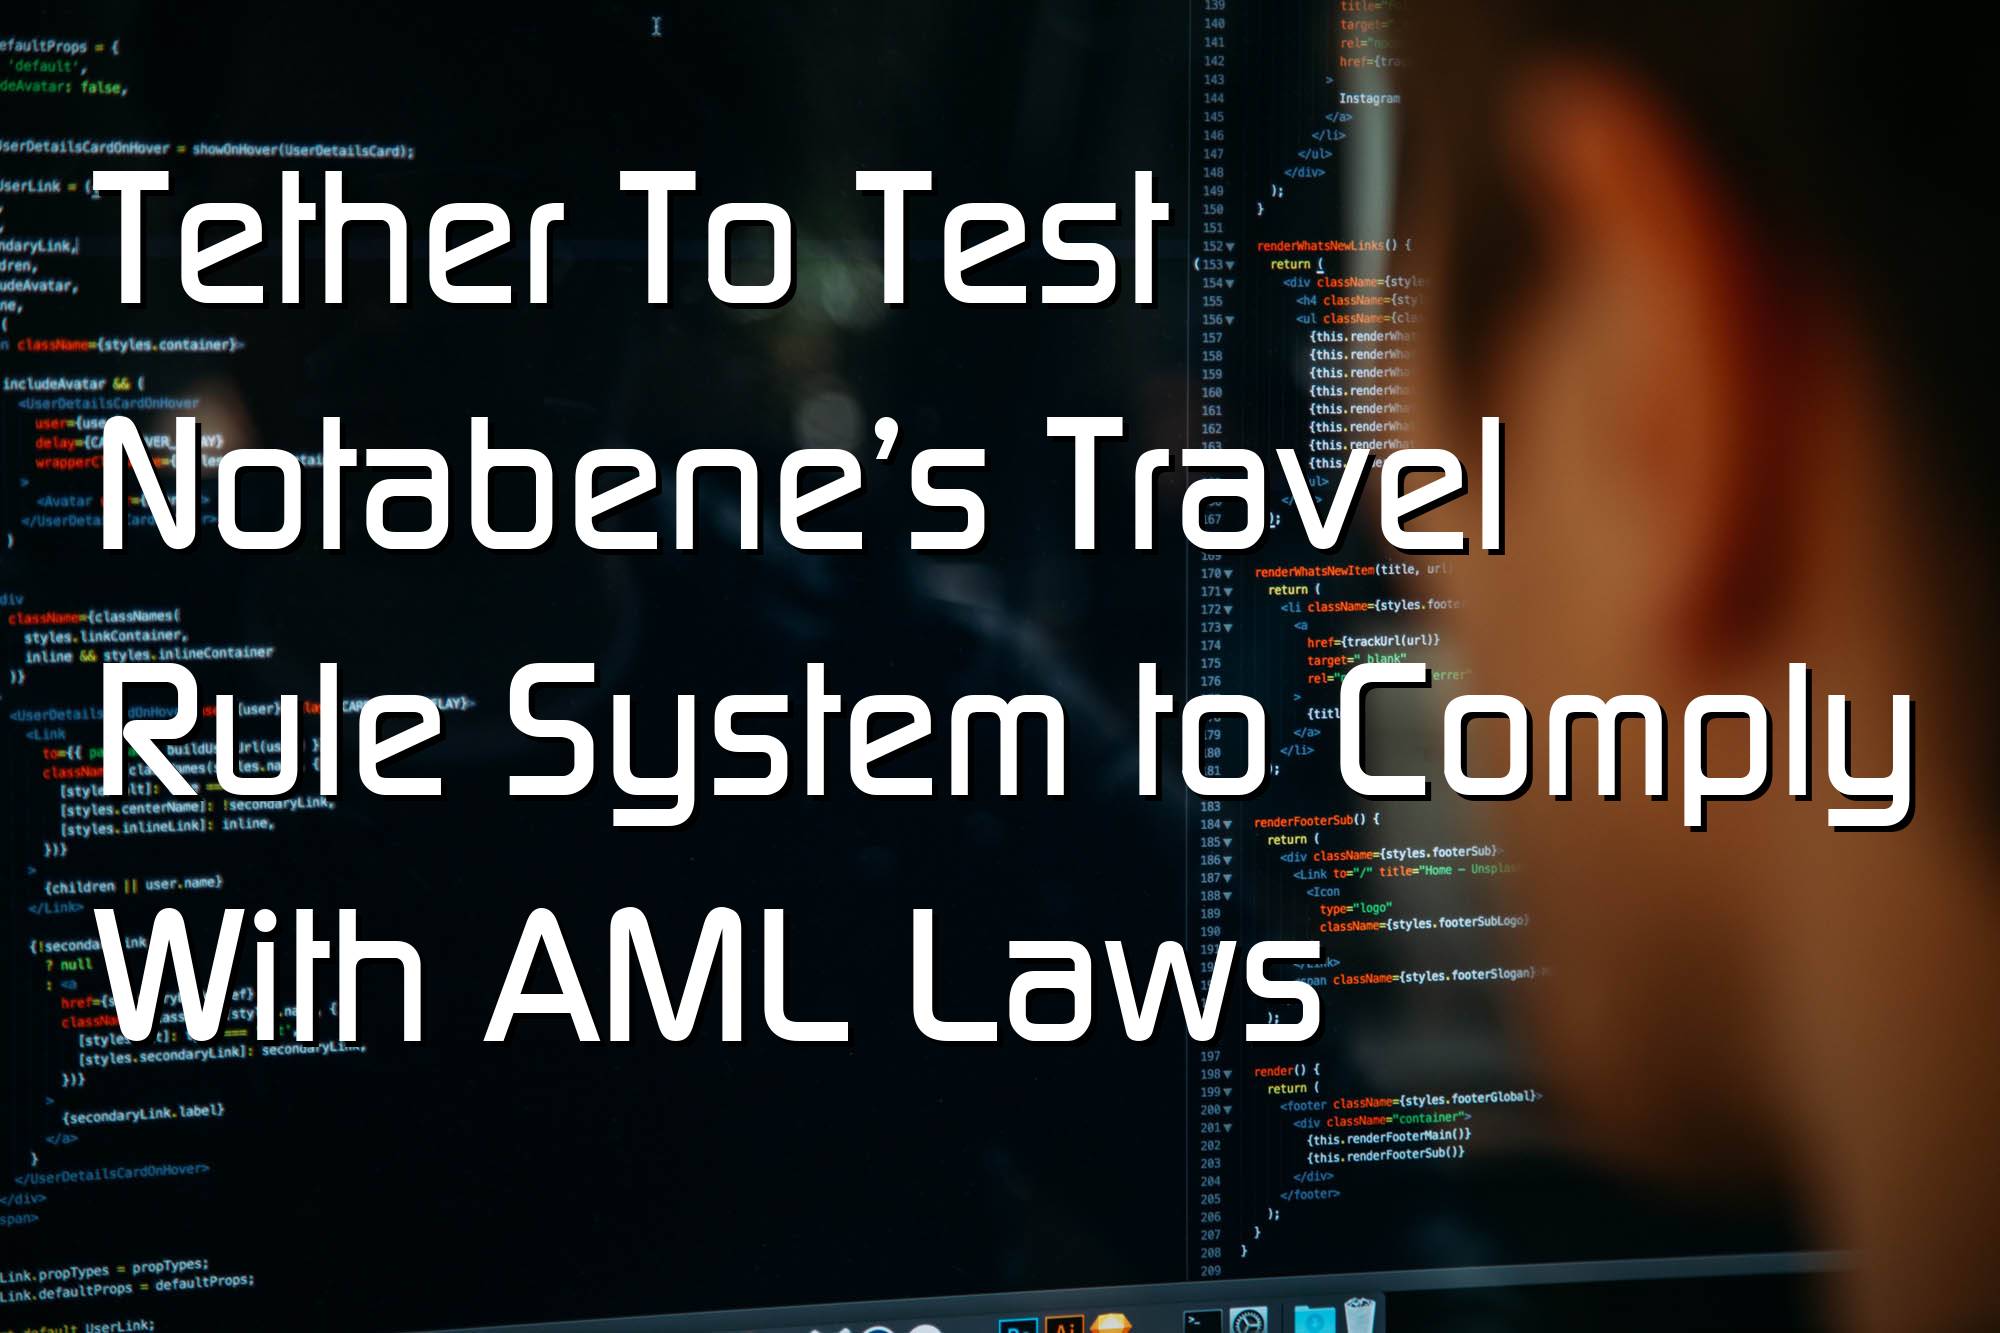 @$60362: Tether To Test Notabene’s Travel Rule System to Comply With AML Laws